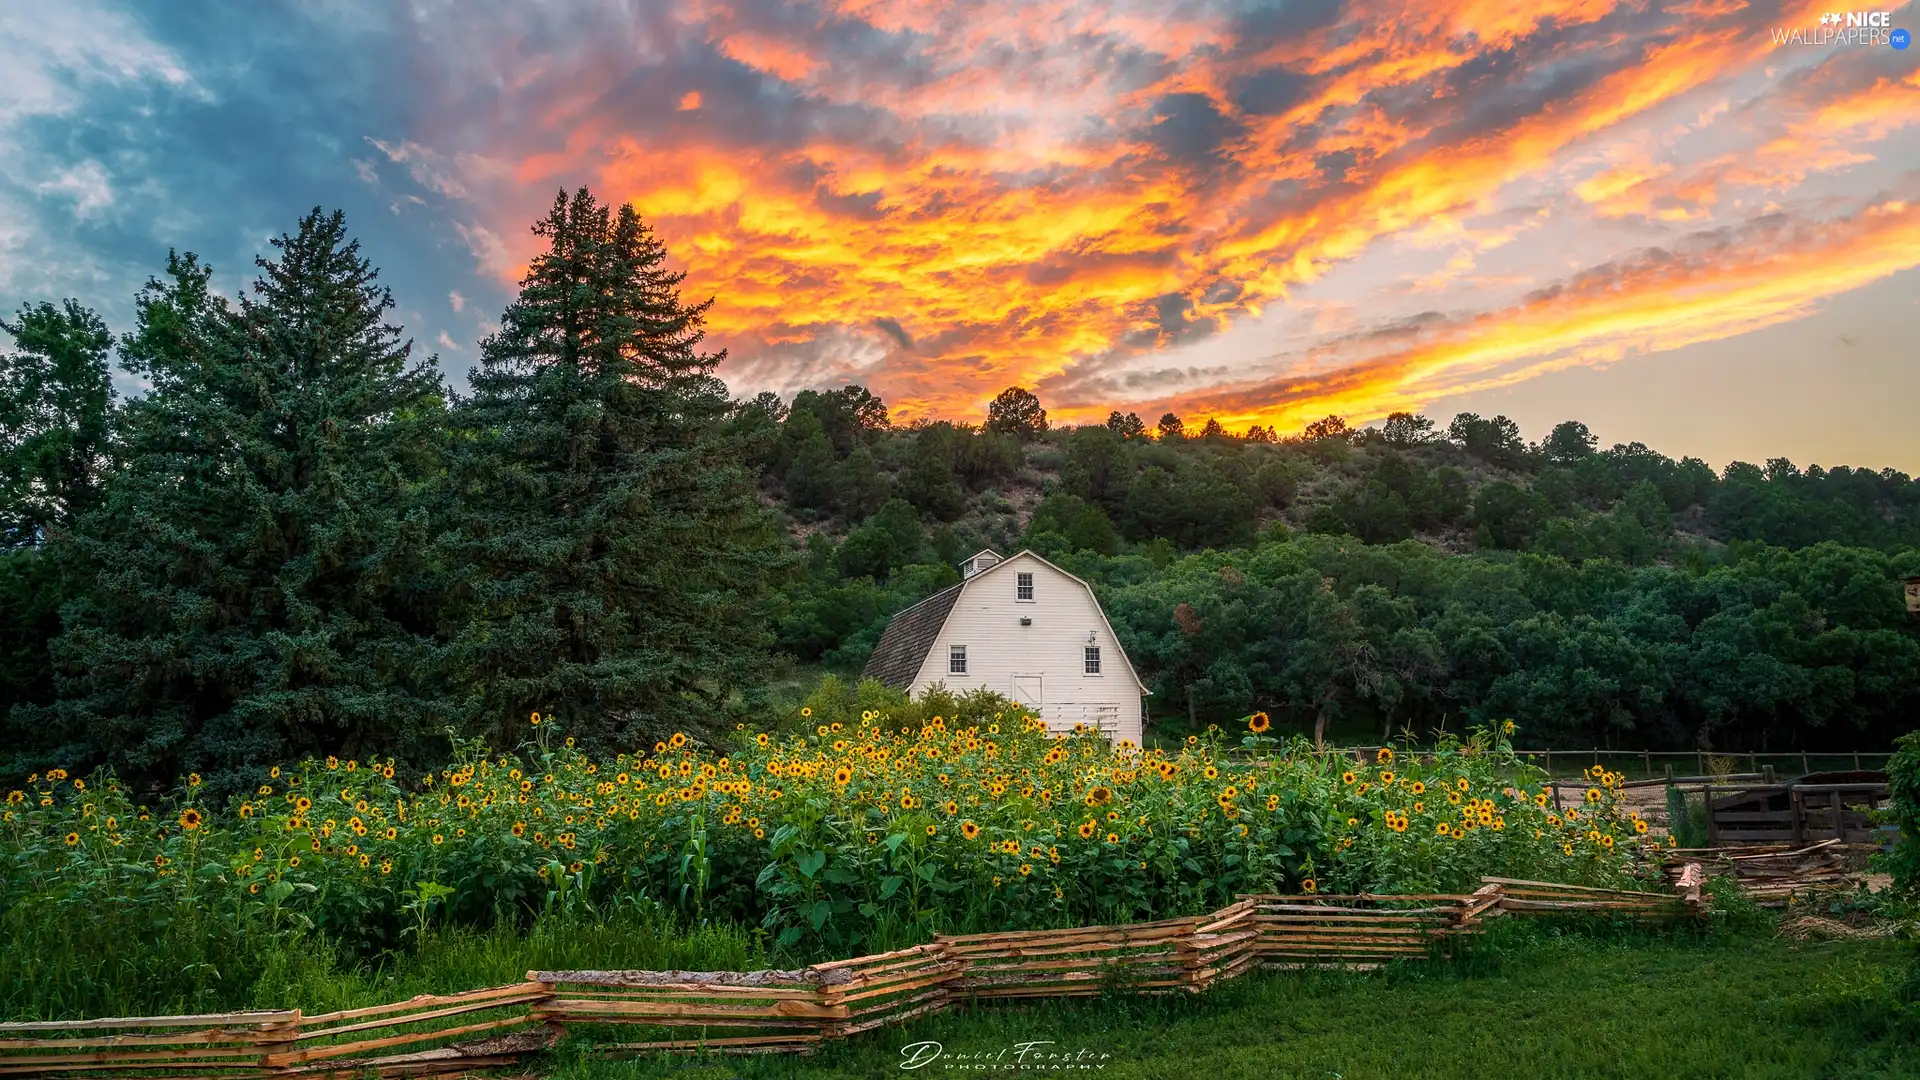 forest, fence, viewes, Nice sunflowers, house, trees, Great Sunsets